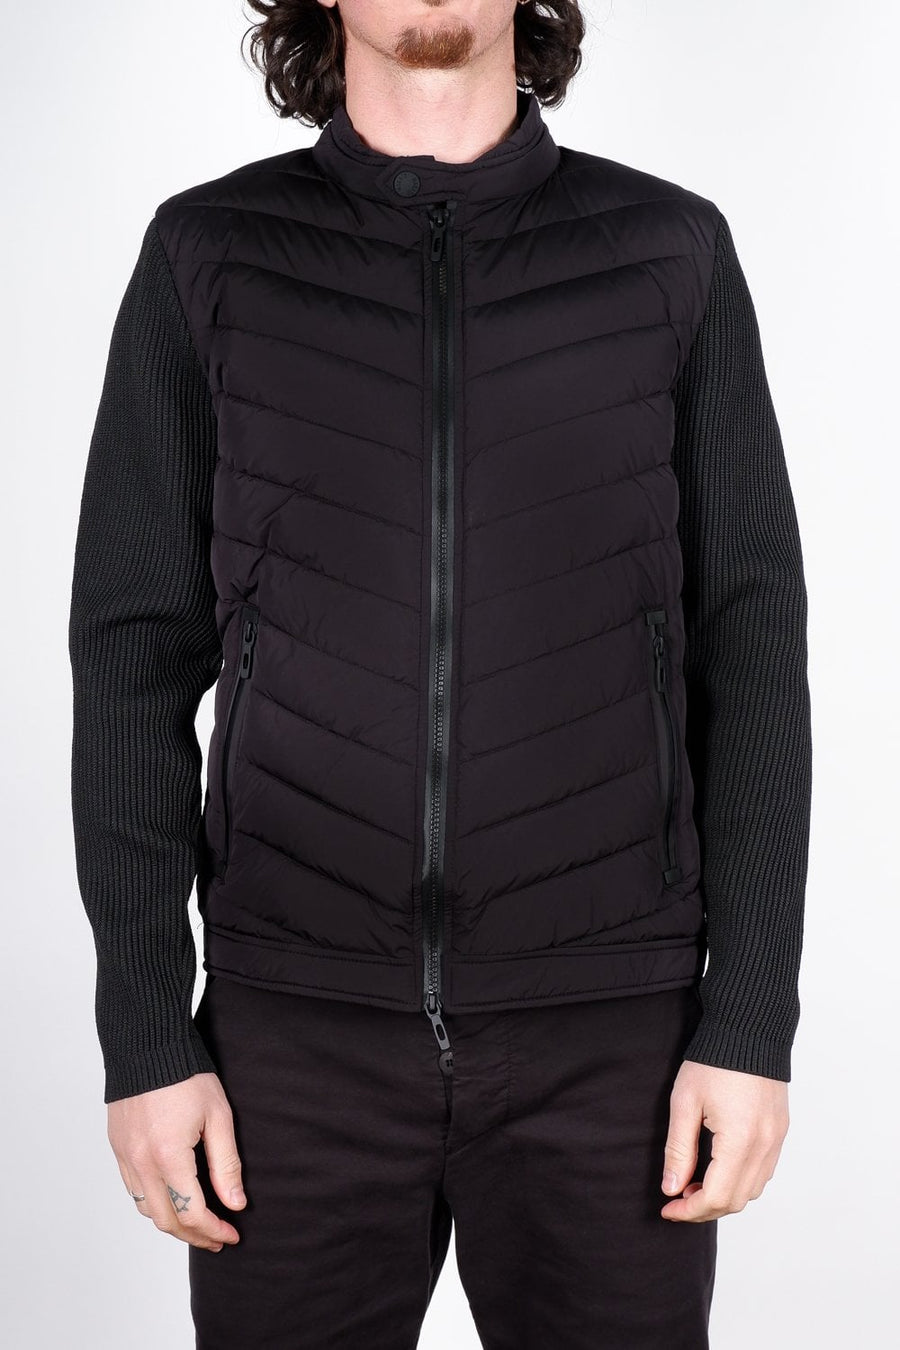 Buy the Antony Morato Quilted Bomber Jacket in Black at Intro. Spend £50 for free UK delivery. Official stockists. We ship worldwide.